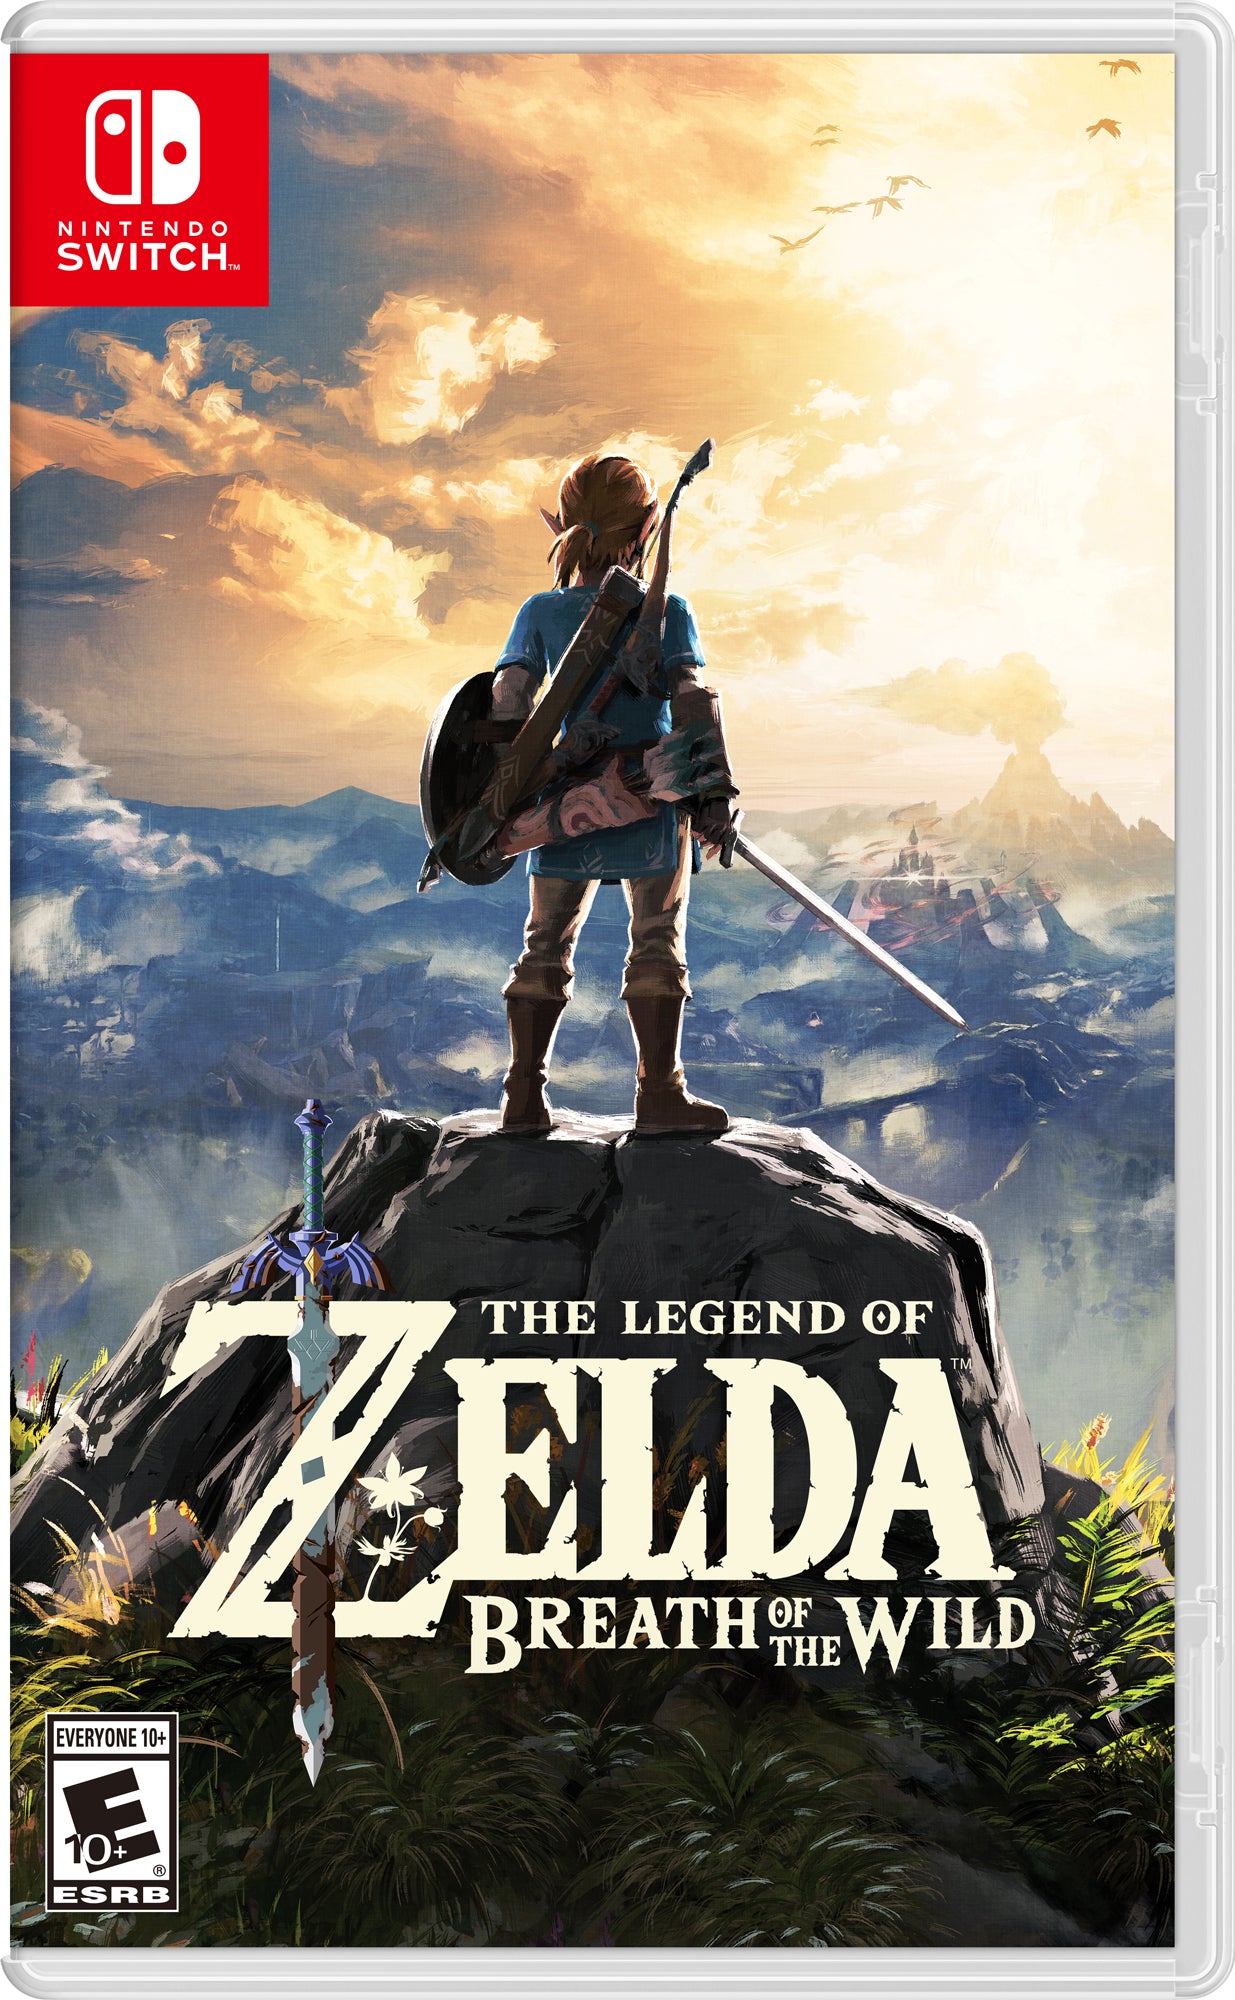 Nintendo Switch OLED Console Neon Red & Blue with The Legend of Zelda: Breath of the Wild, Accessory Starter Kit and Screen Cleaning Cloth Bundle - Pro-Distributing